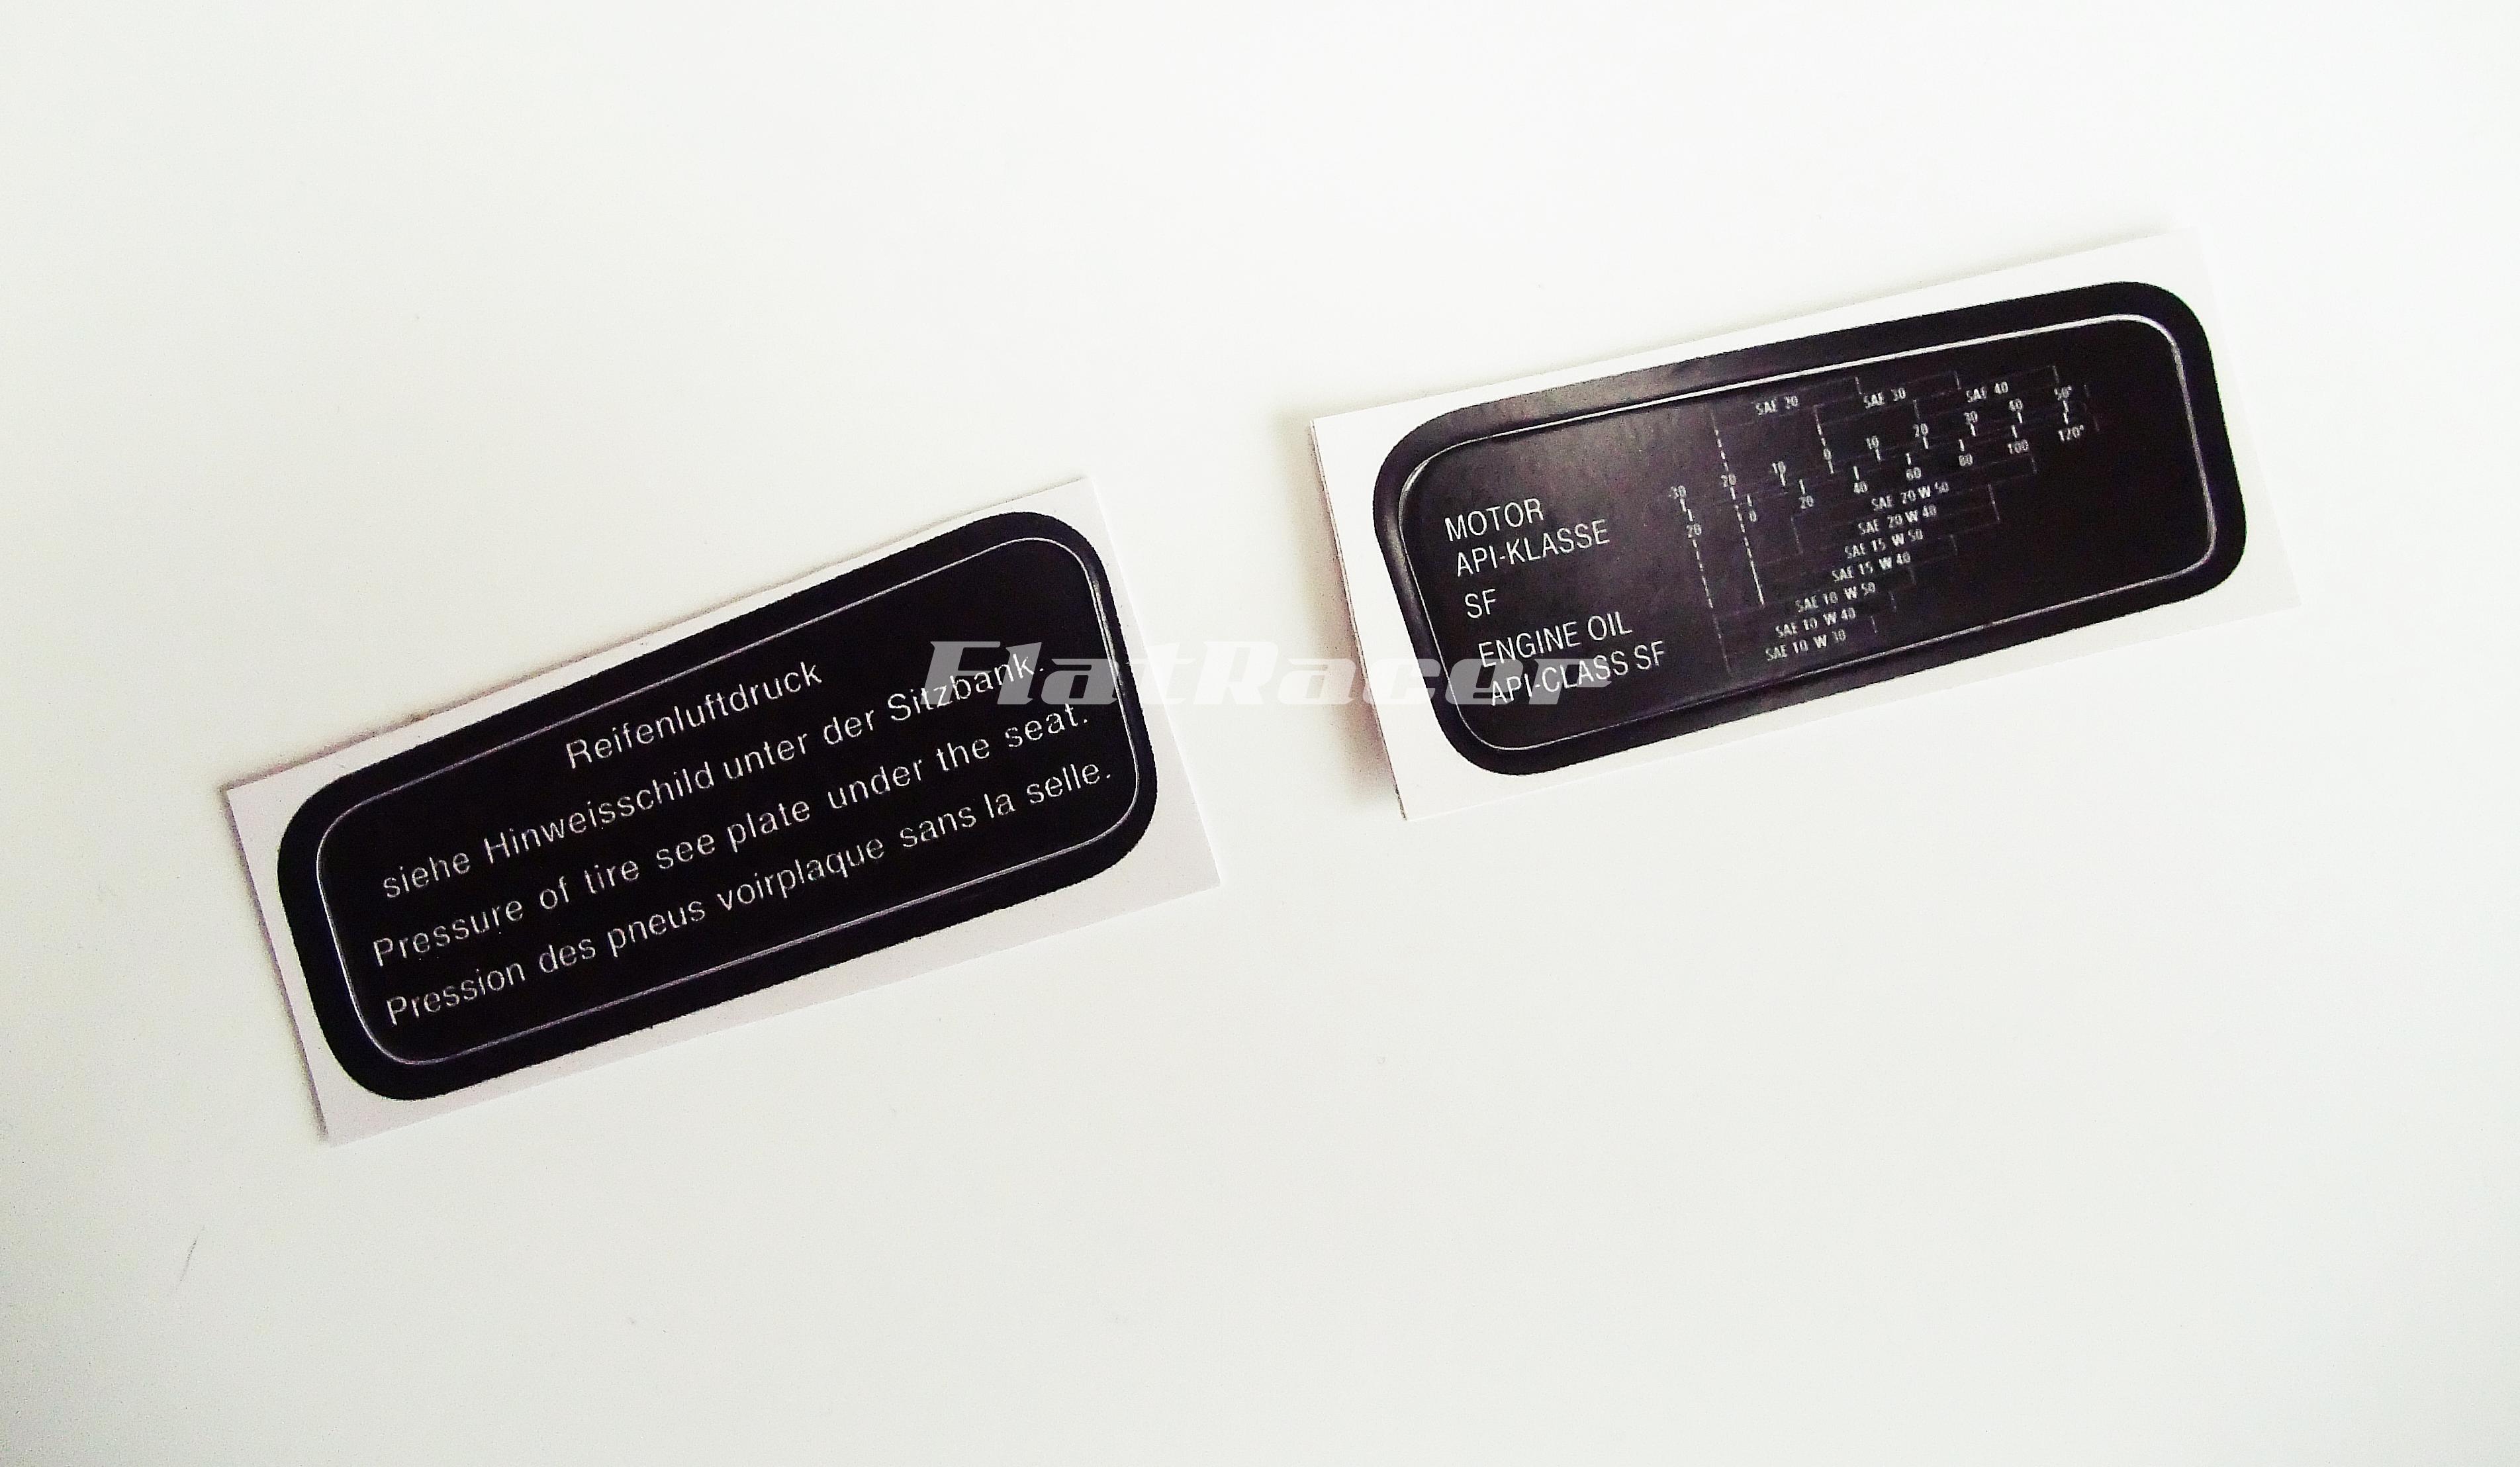 FlatRacer BMW R100RS dash board panel stickers (pair) - 46631235635 + 46631338232